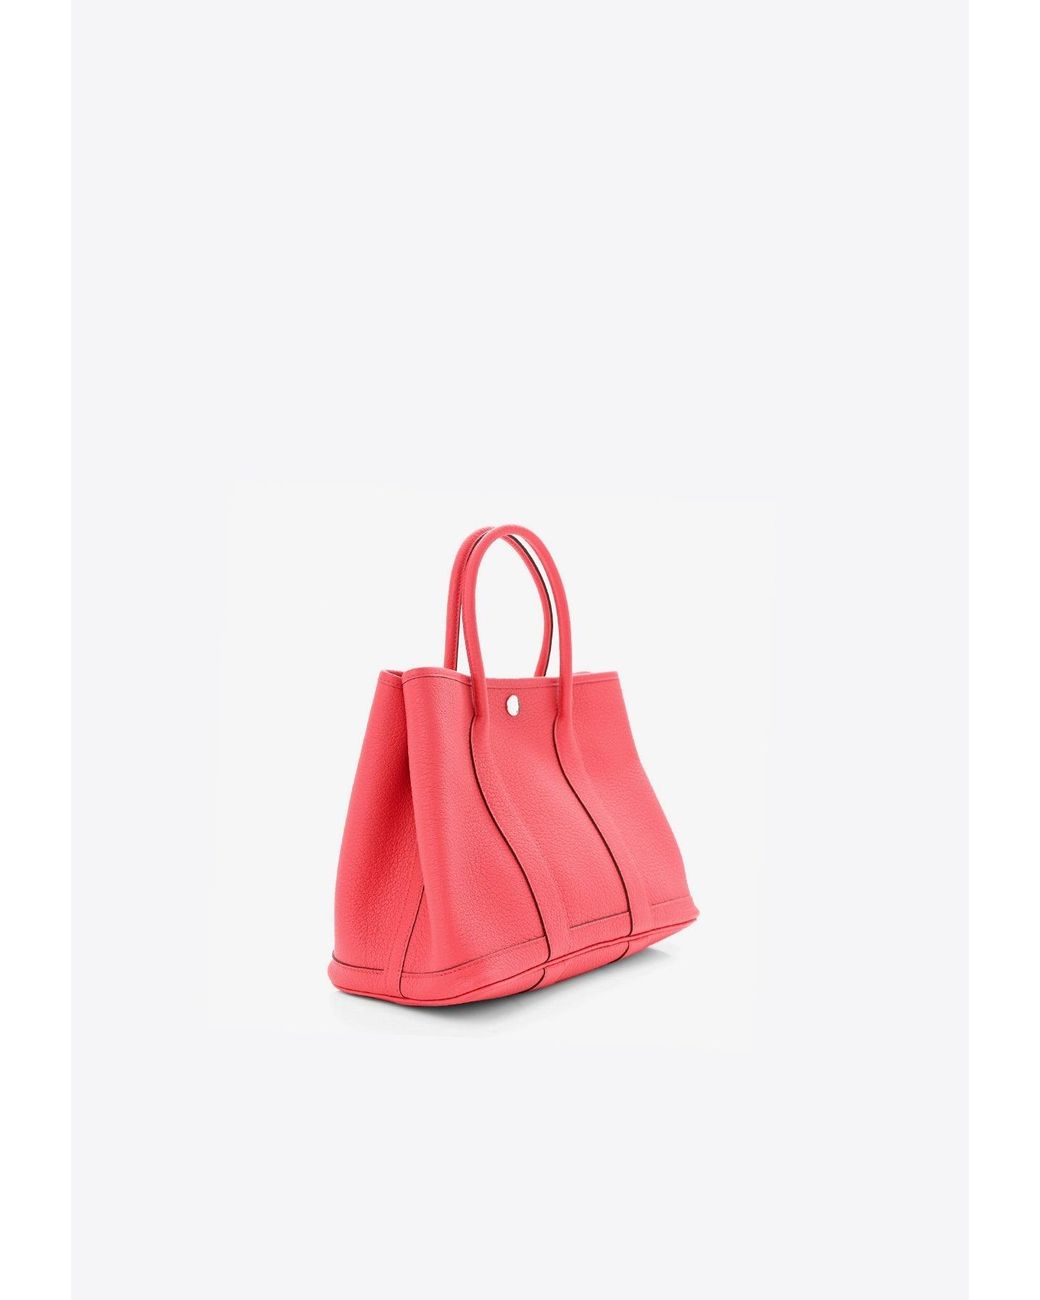 HERMES Garden party PM Tote Bag Bougainvillea pink Taurillon